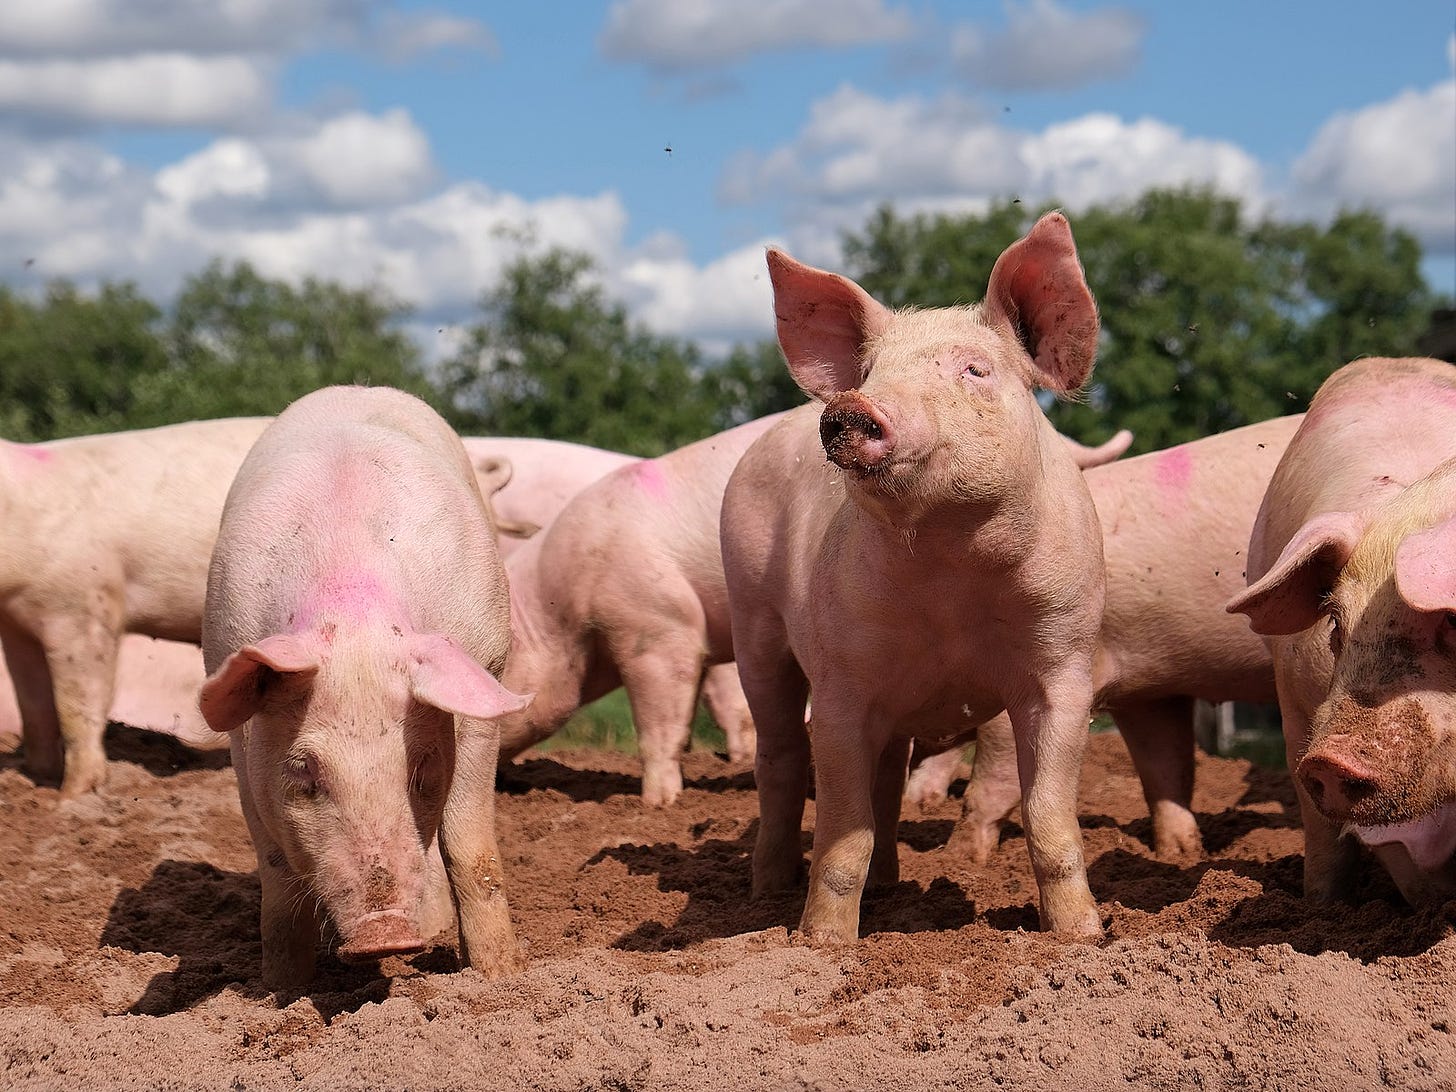 an image of six or seven pigs standing in the mud with trees in the background, one pig looks up